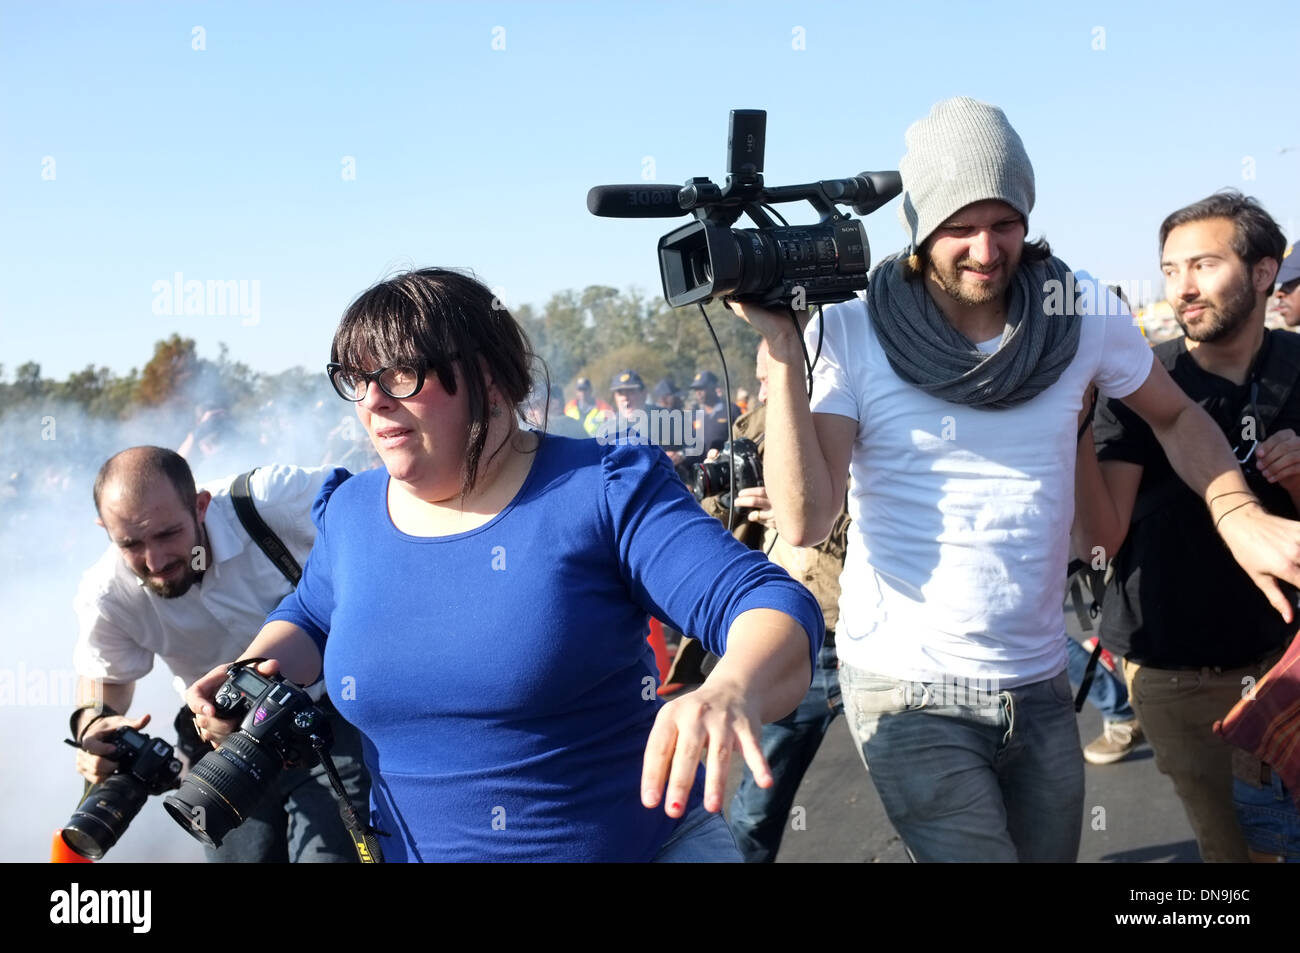 Journalists run away from smoke grenades at a South African protest in Soweto. Stock Photo